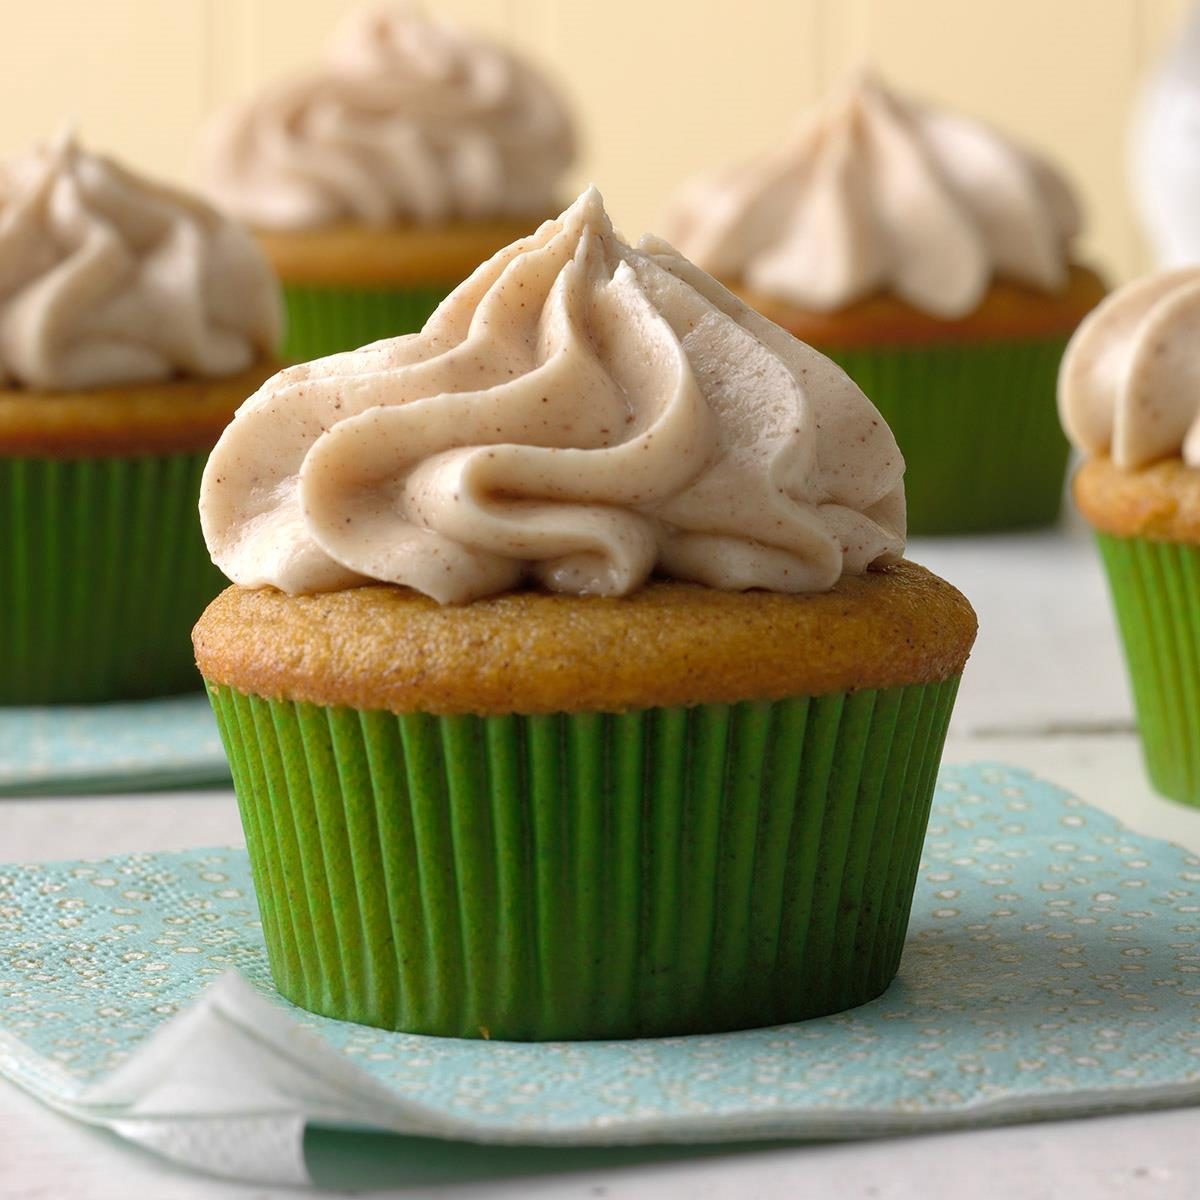 Pumpkin Spice Cupcakes With Cream Cheese Frosting Exps Mrmz16 42386 B09 16 6b 22